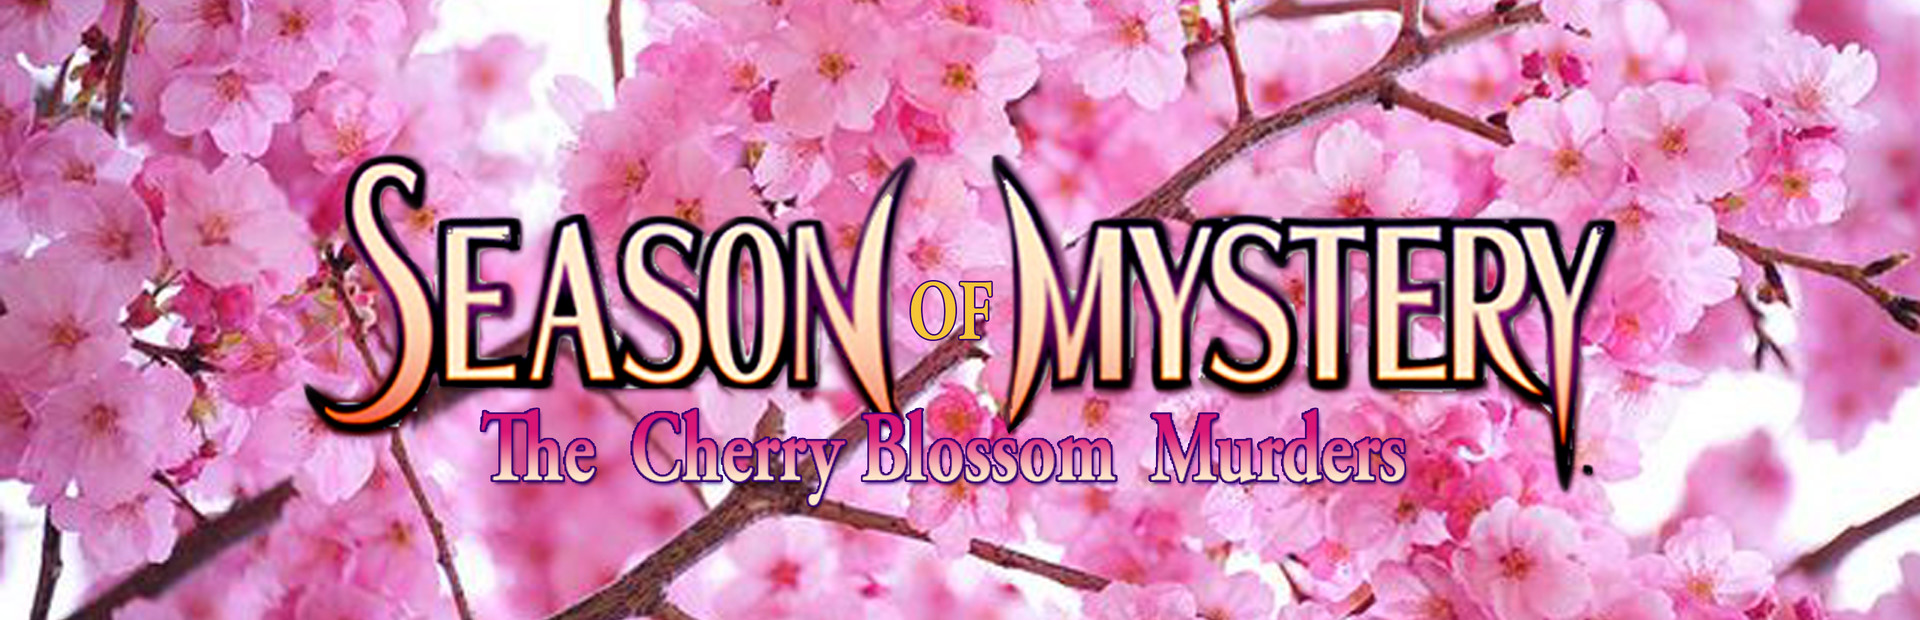 SEASON OF MYSTERY: The Cherry Blossom Murders cover image